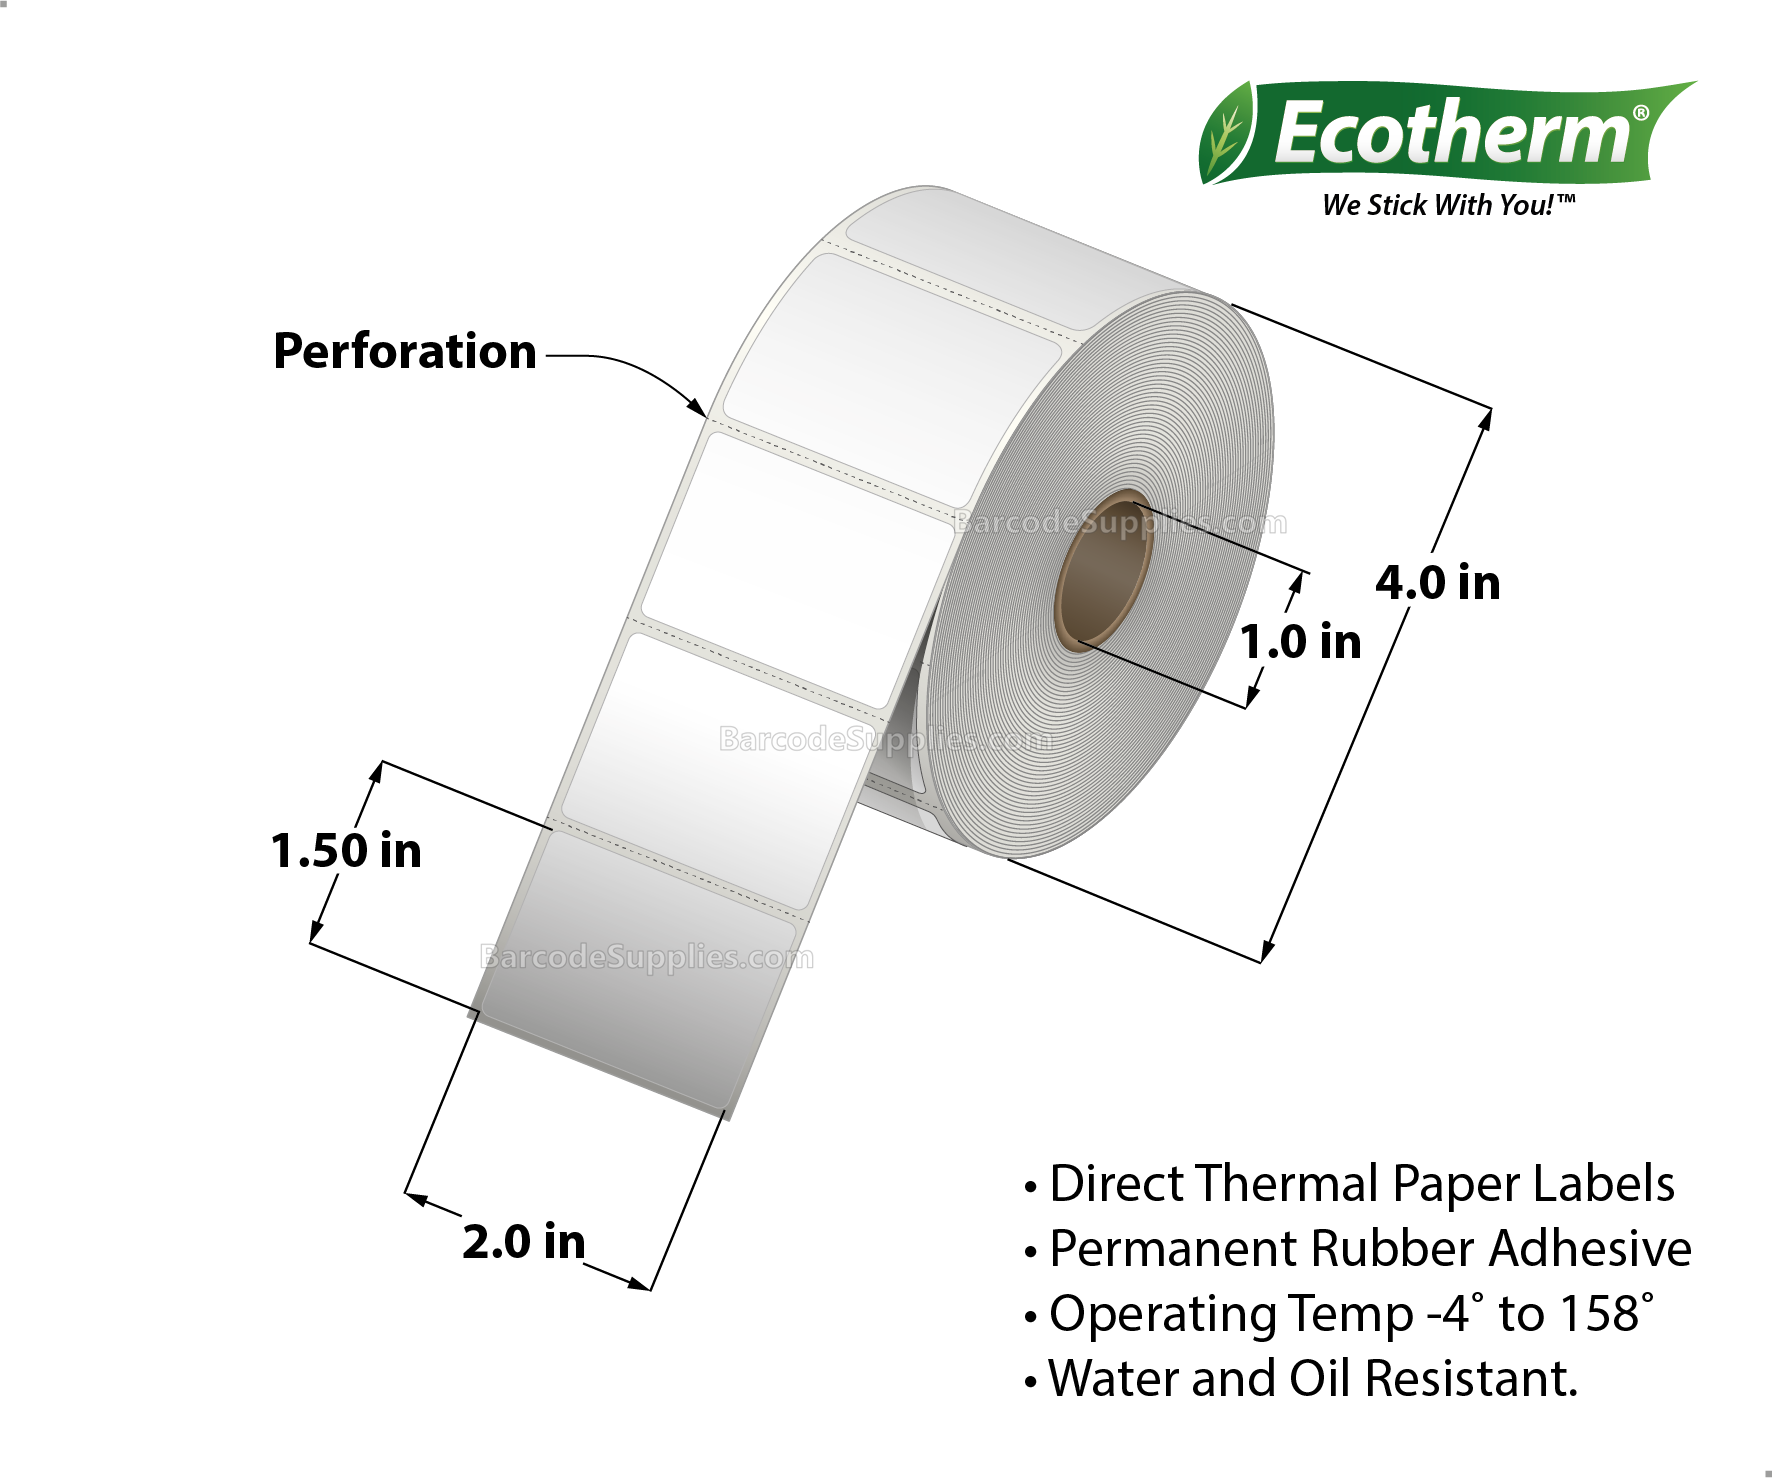 Products 2 x 1.5 Direct Thermal White Labels With Rubber Adhesive - Perforated - 1320 Labels Per Roll - Carton Of 4 Rolls - 5280 Labels Total - MPN: ECOTHERM14133-4